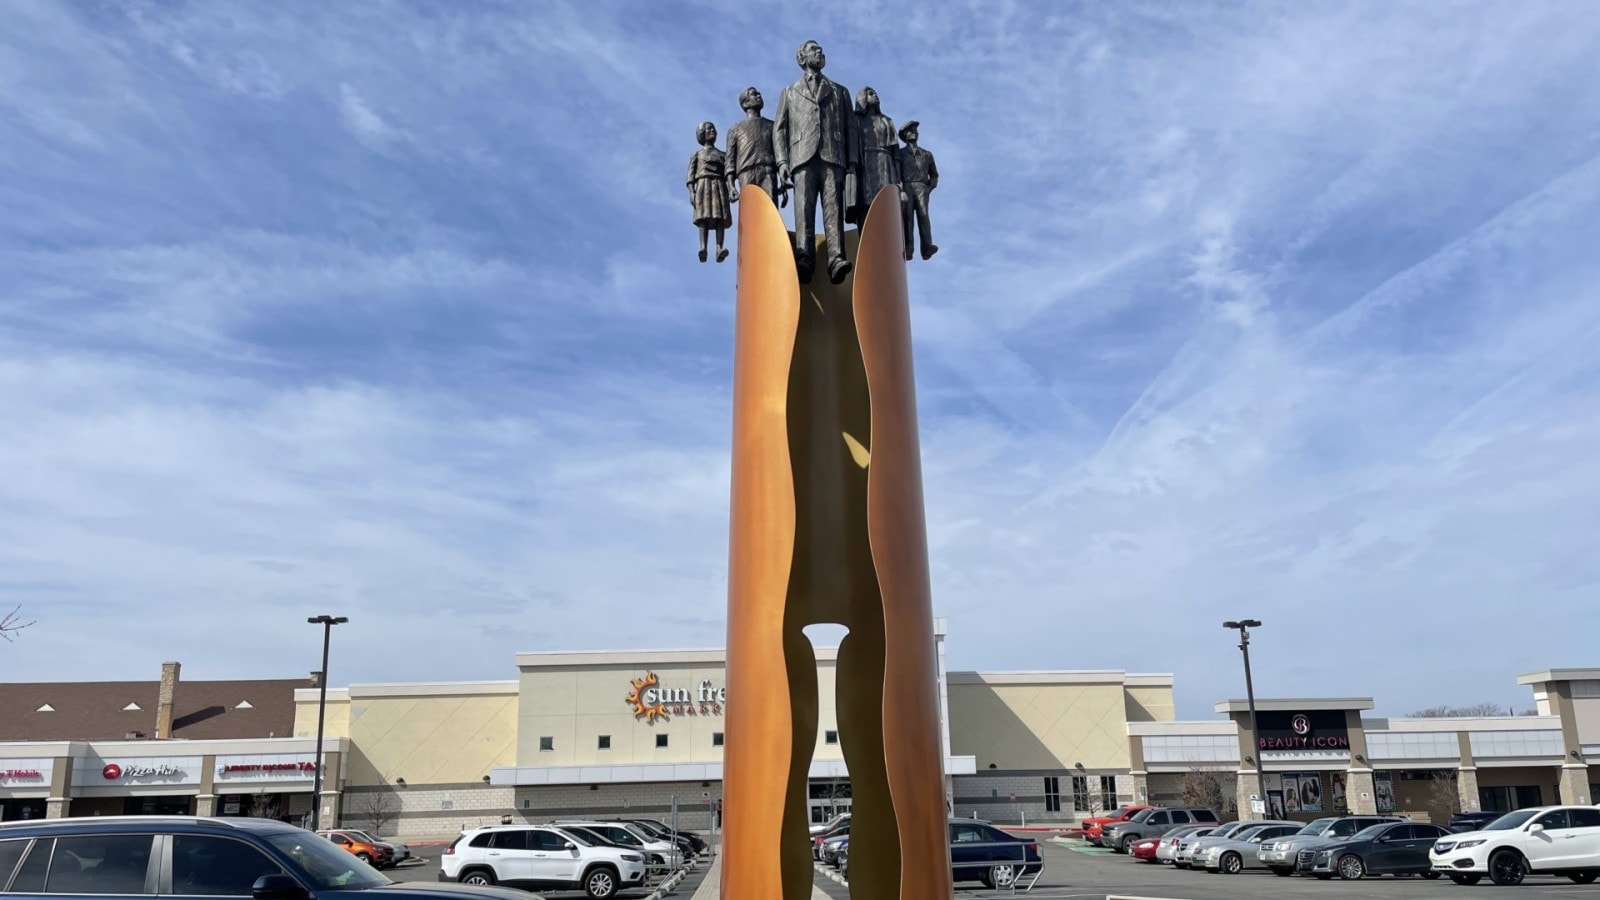 A tall bronze memorial with figures at the top in front of Sun Fresh market.